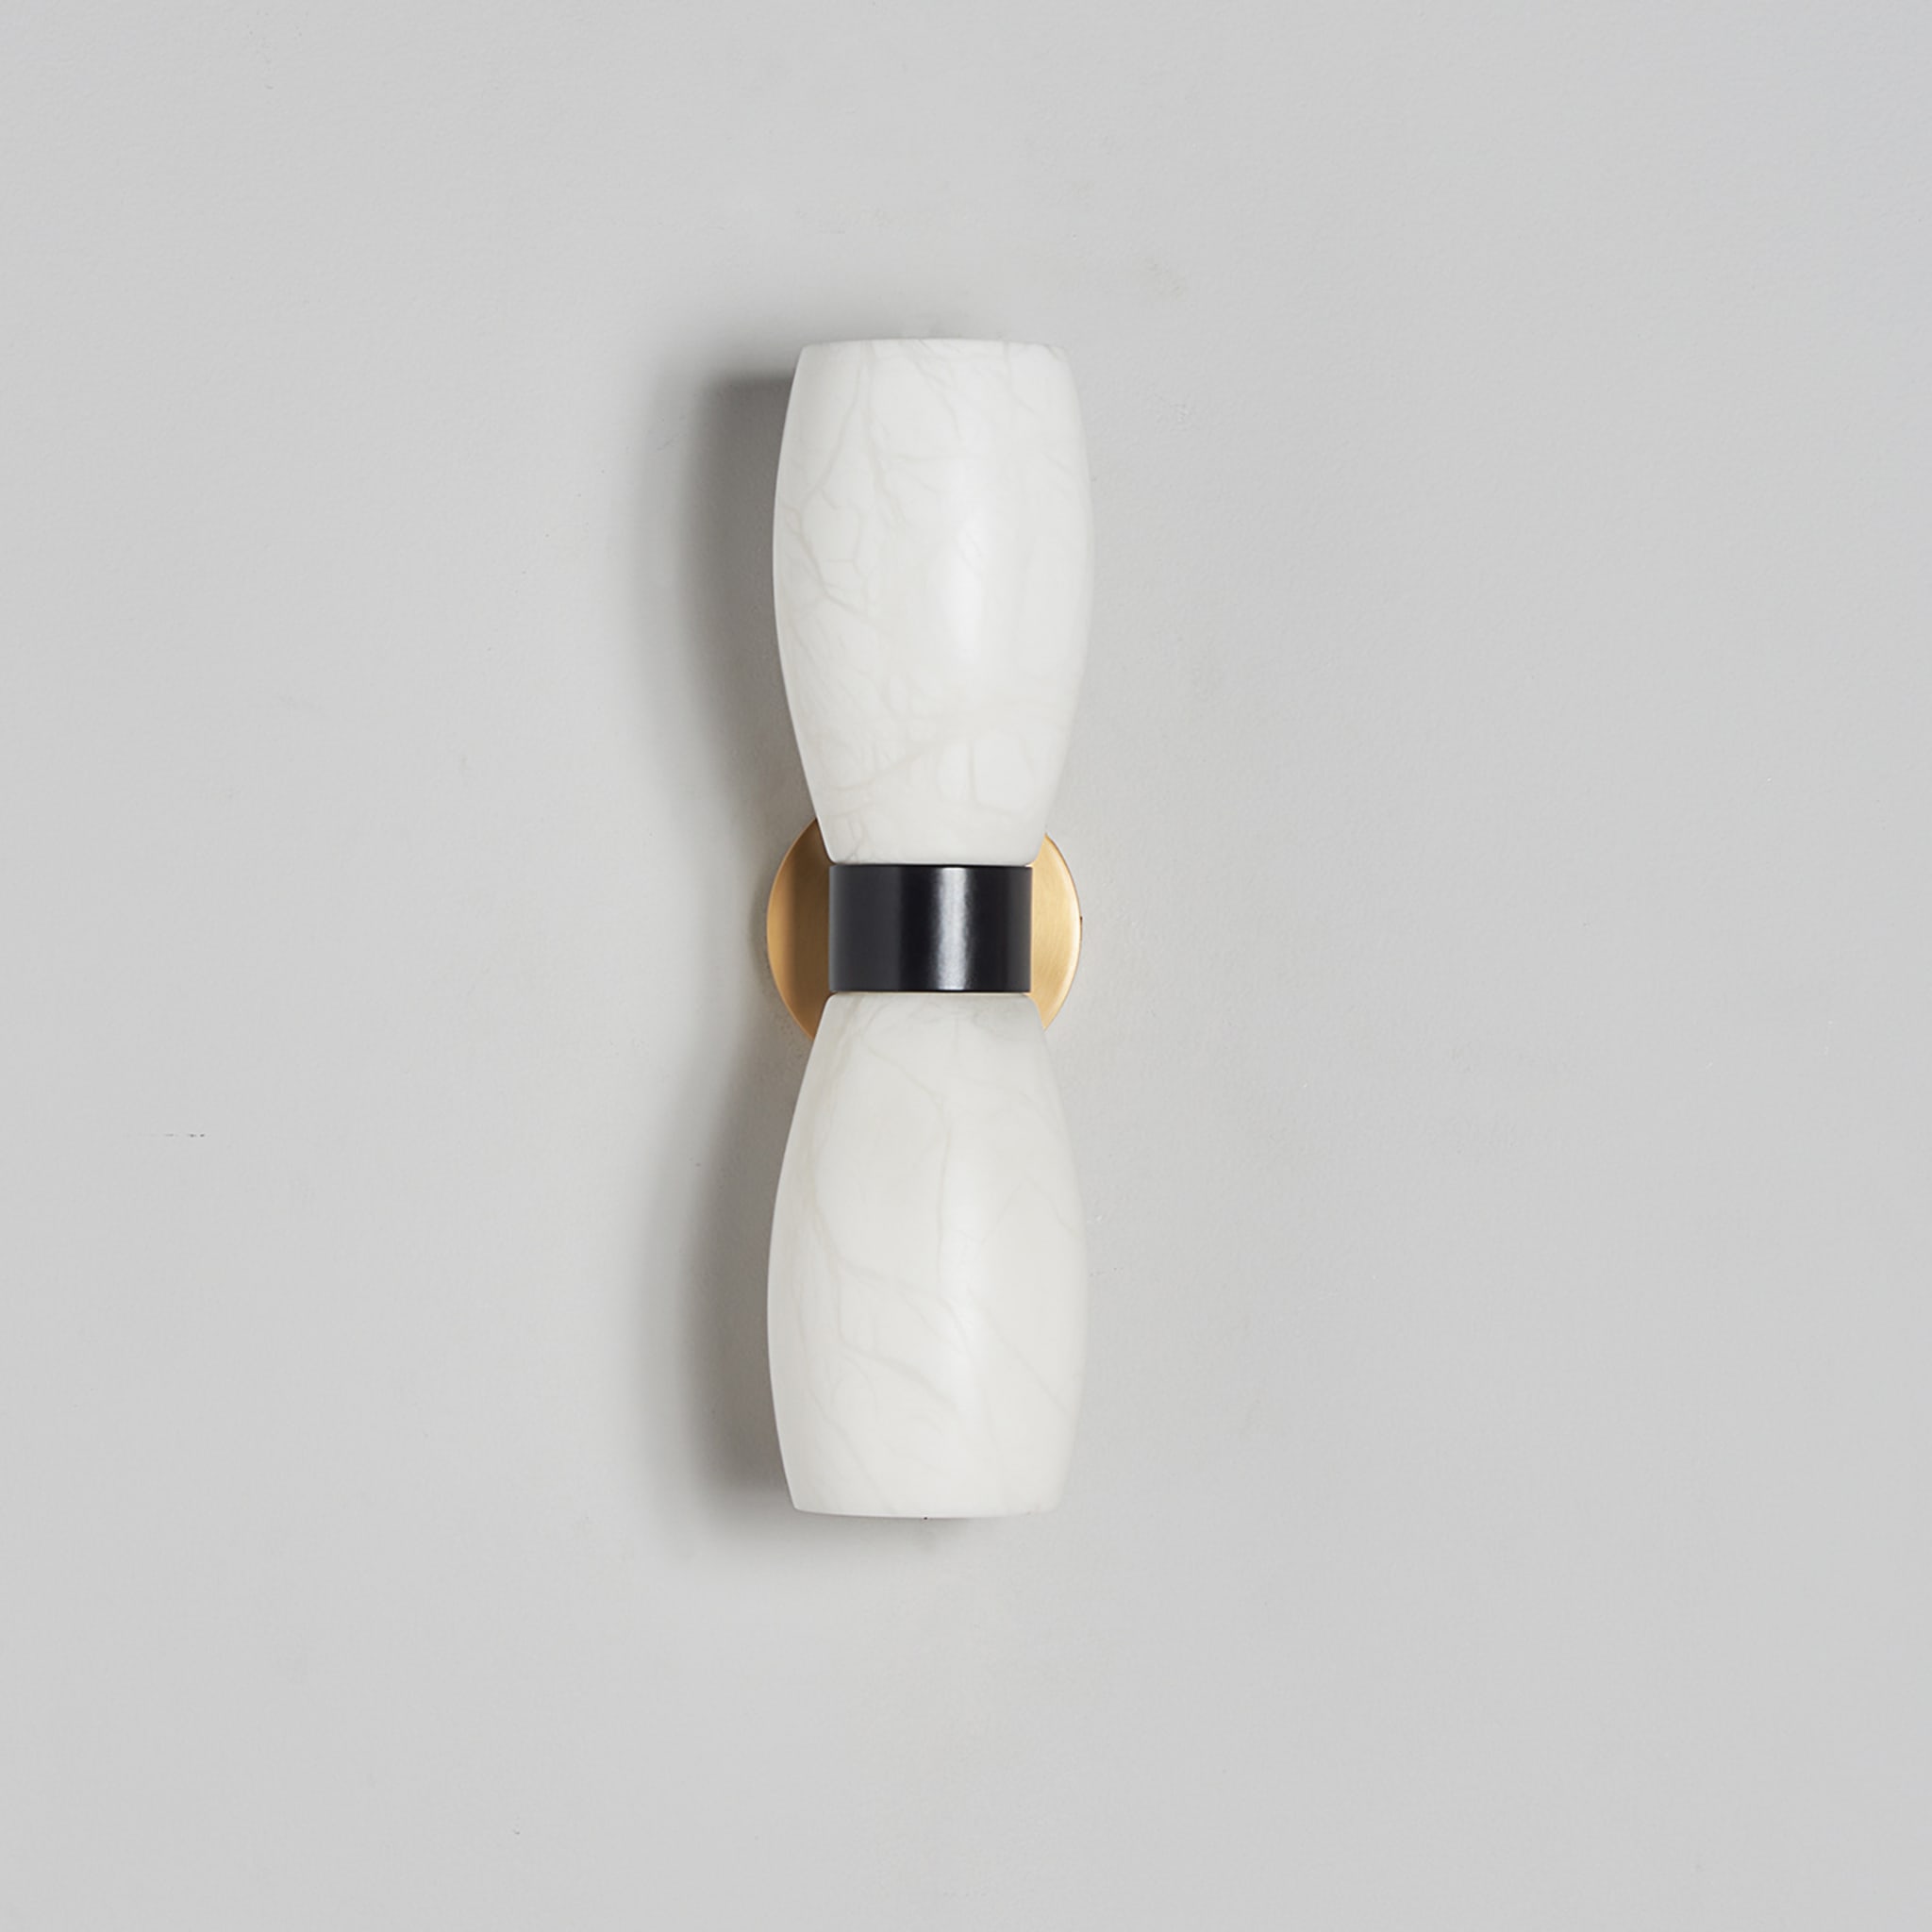 "Demetra" Wall Sconce in Satin French Gold, Mat Balck and Alabaster - Alternative view 4